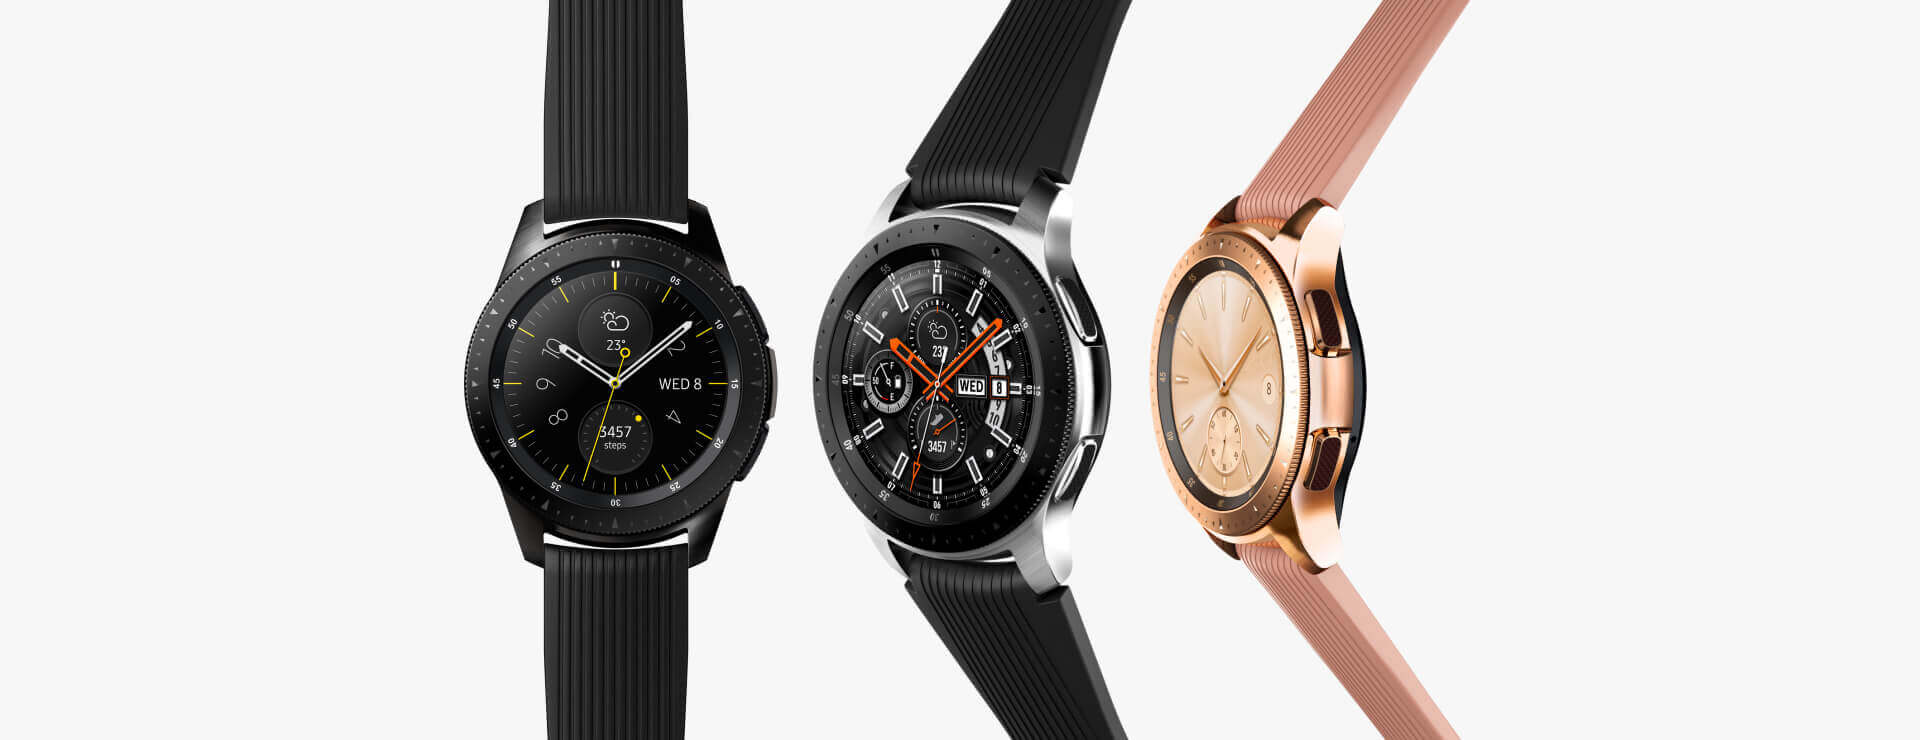 Three Galaxy Watch models in parallel: 42mm in Midnight Black on the left, 46mm in Silver in the middle, 42mm in Rose Gold on the right.